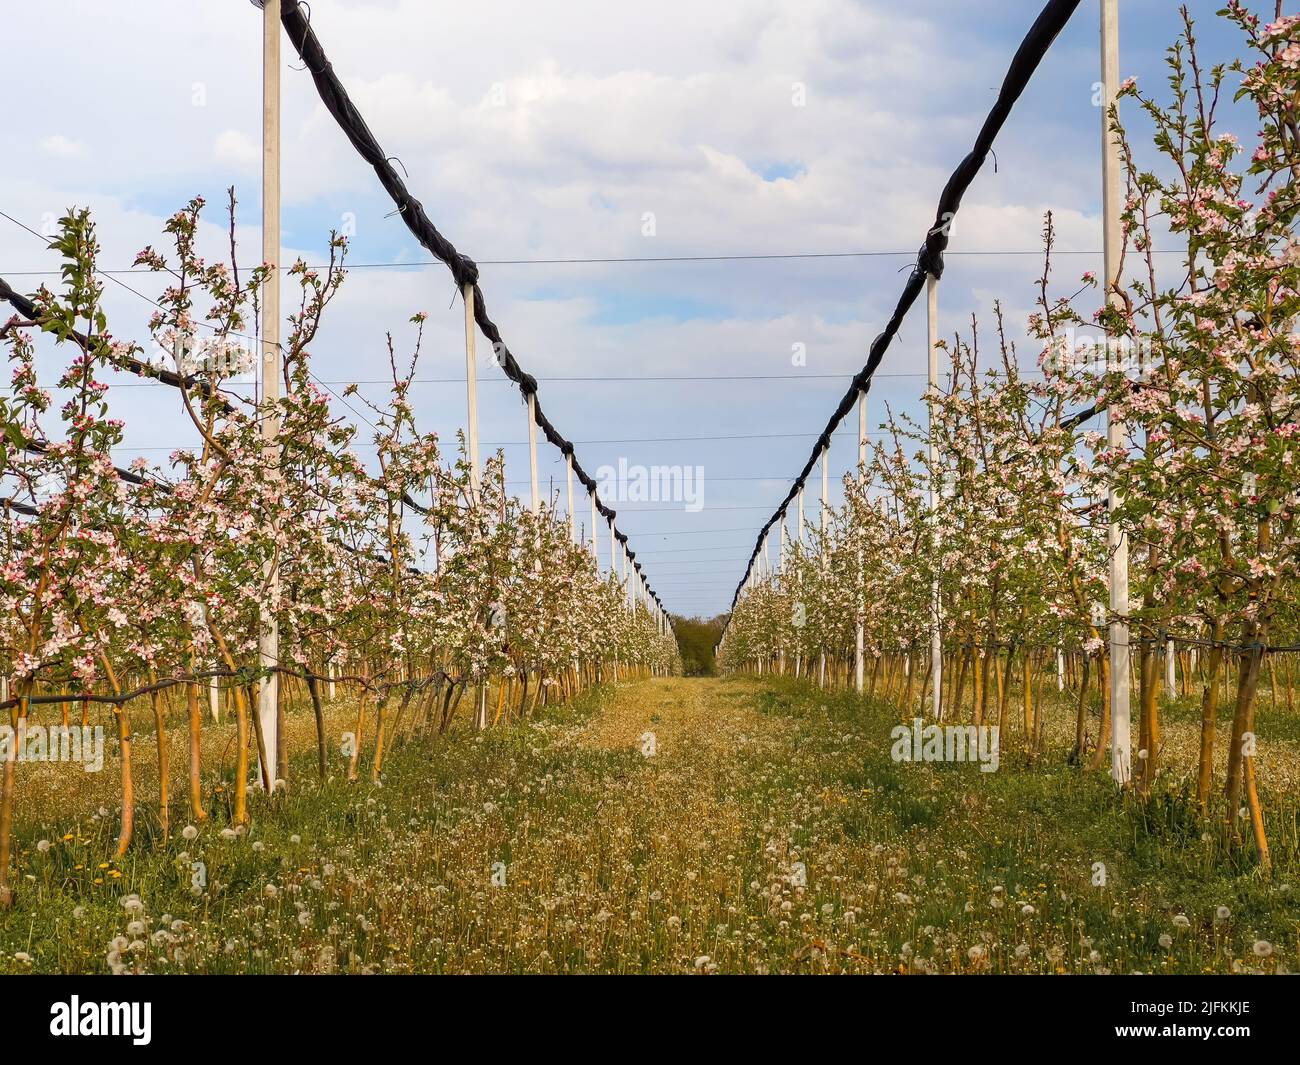 Apple fruit orchard with trees in bloom, diminishing perspective Stock Photo